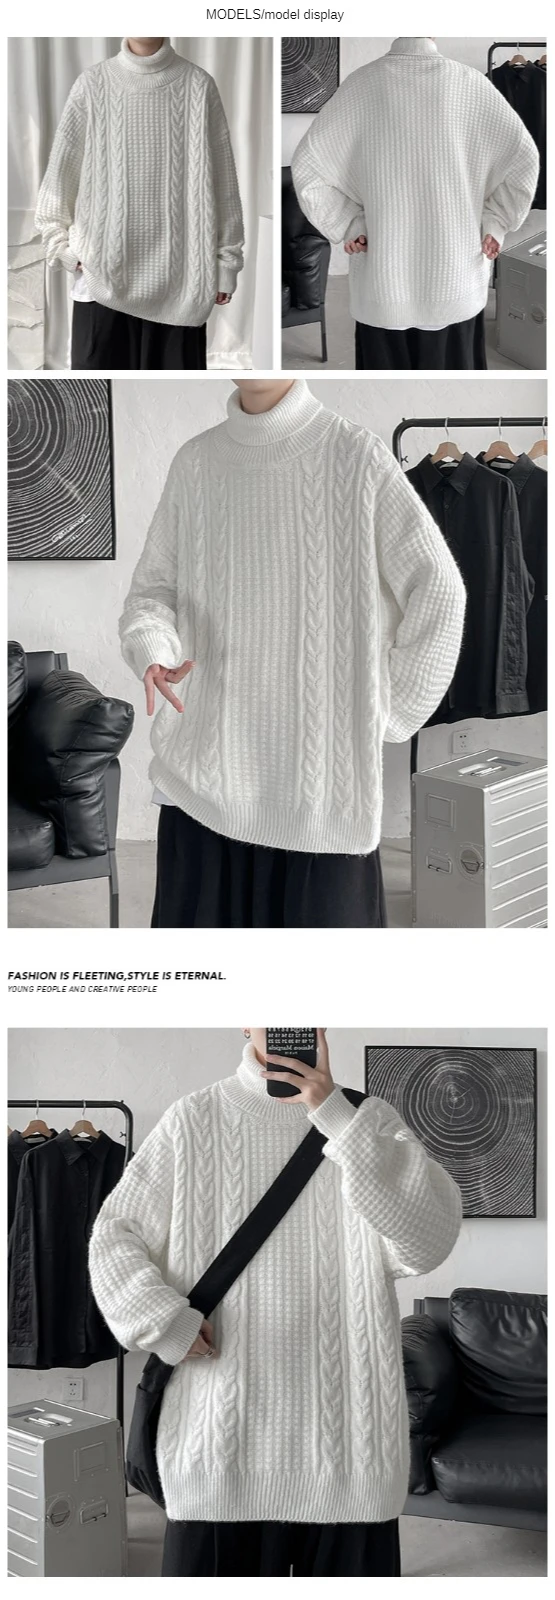 mens turtle neck jumper Turtleneck Sweaters Men Loose Oversized Knitted Pullovers Fashion Youthful Vitality Knitted Sweater Men Pullovers Plus Size 5XL half sweater for men